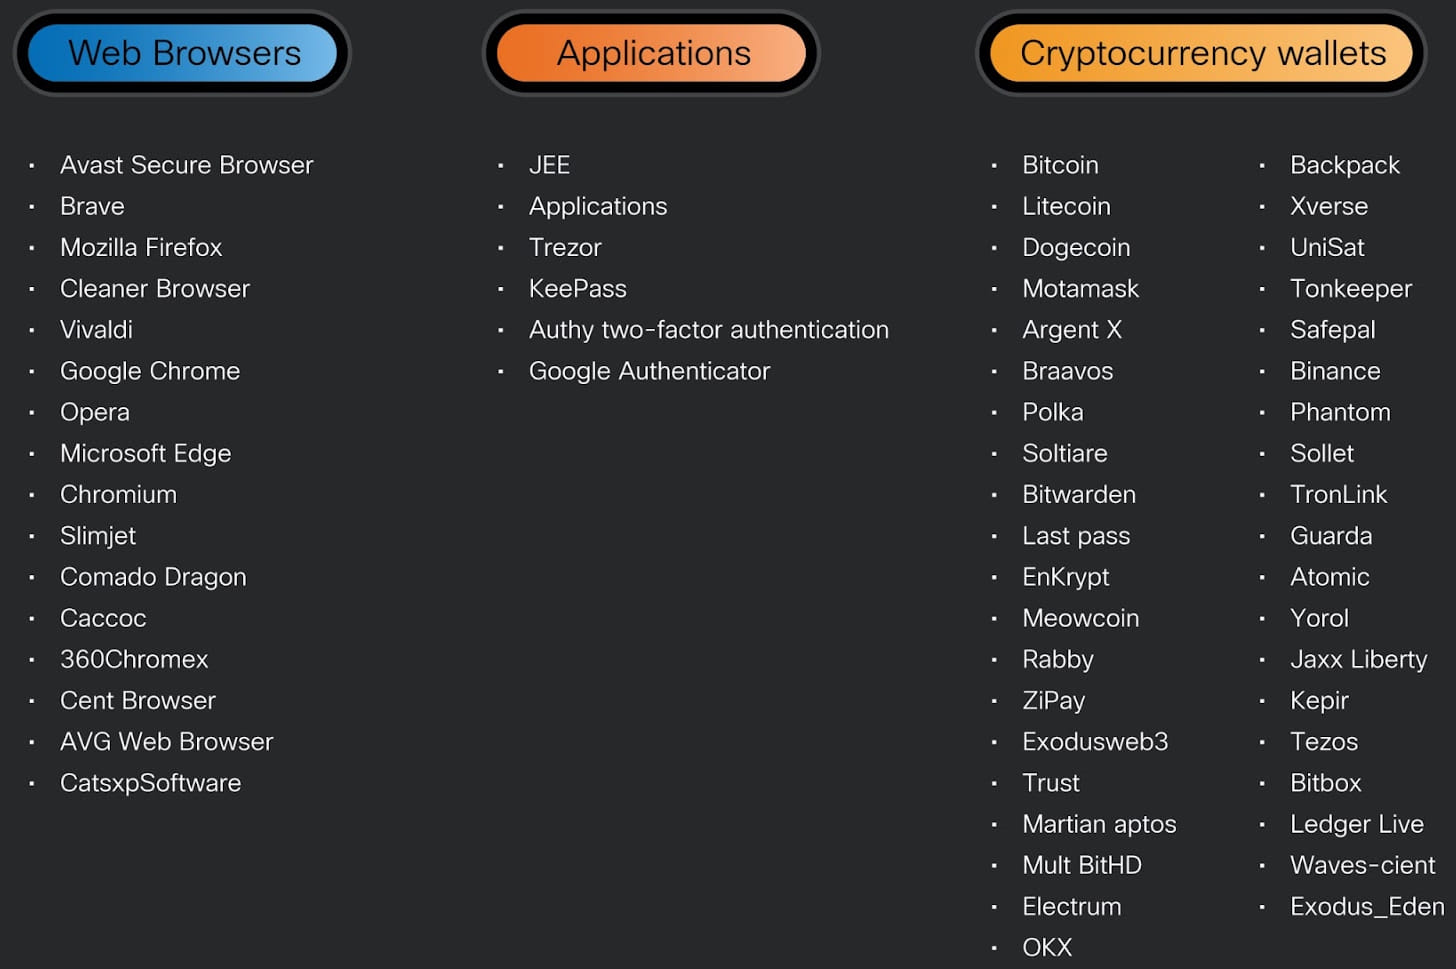 List of applications targeted by the latest version of Cryptbot